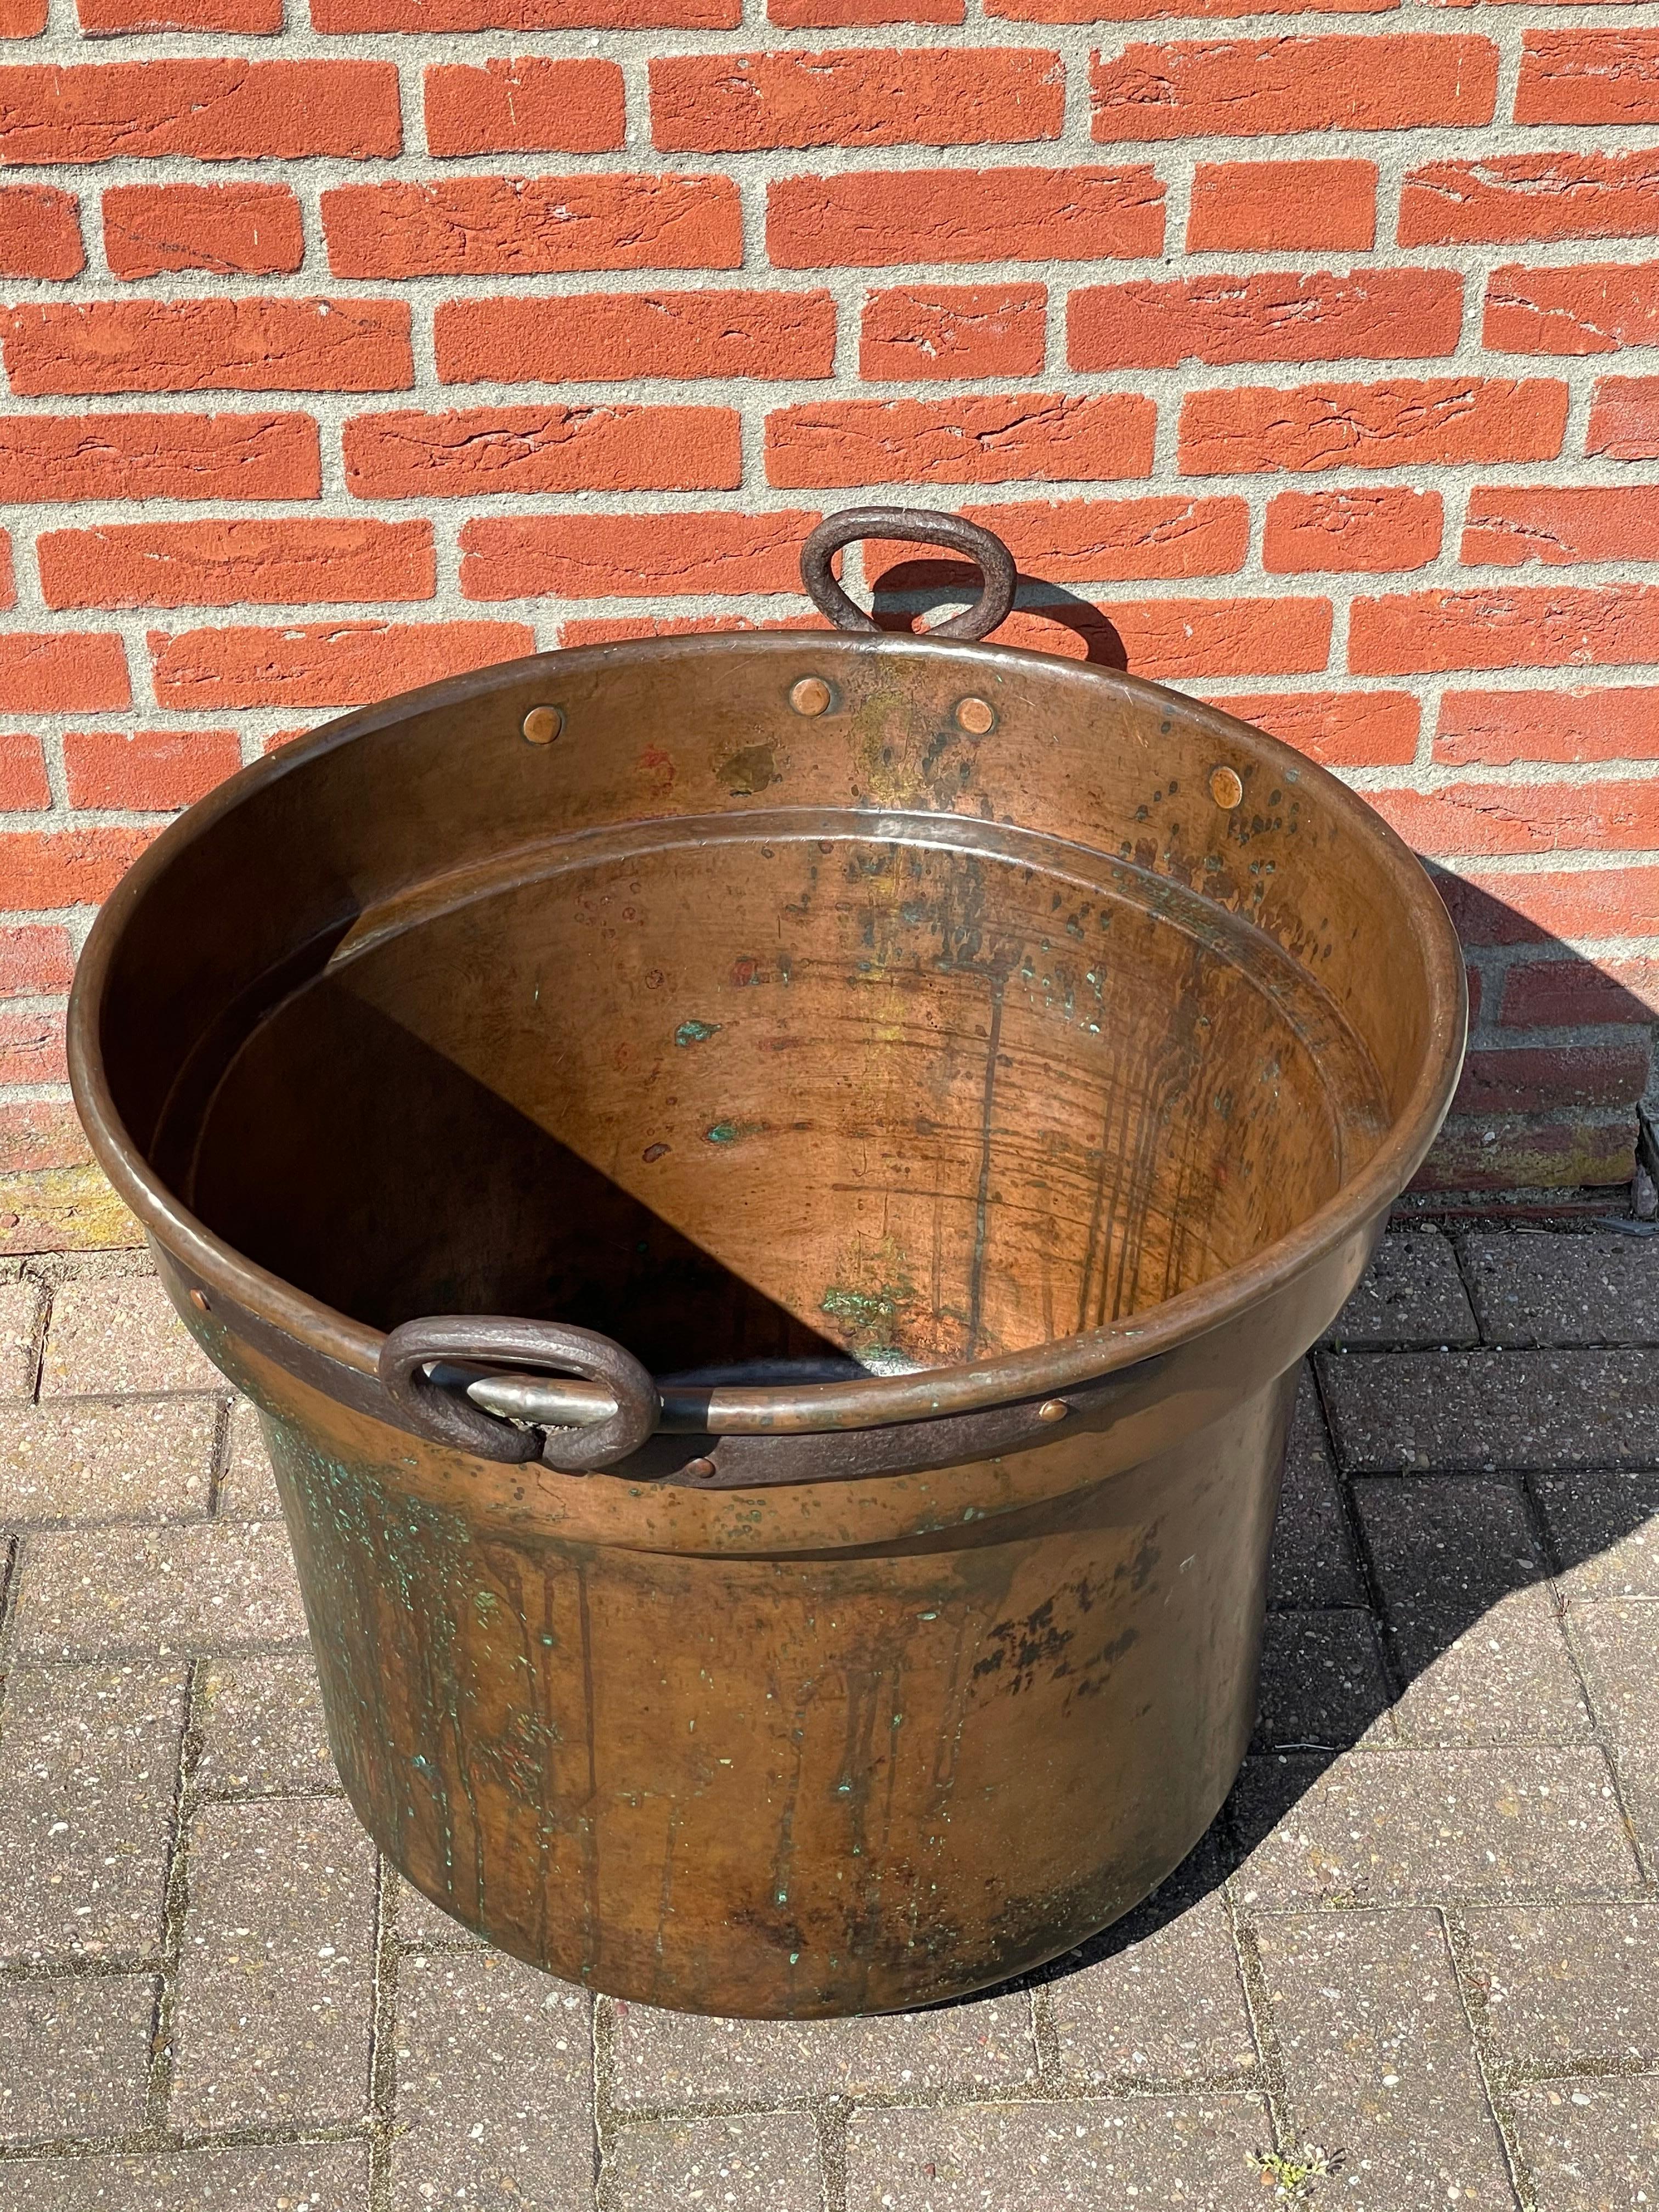 Marvelous size and timeless shape, copper bucket for inside and outside usage.

Only the wealthiest of people in the mid 1800s would have been able to afford a hand-crafted copper bucket of this size and quality. This extra large antique bucket